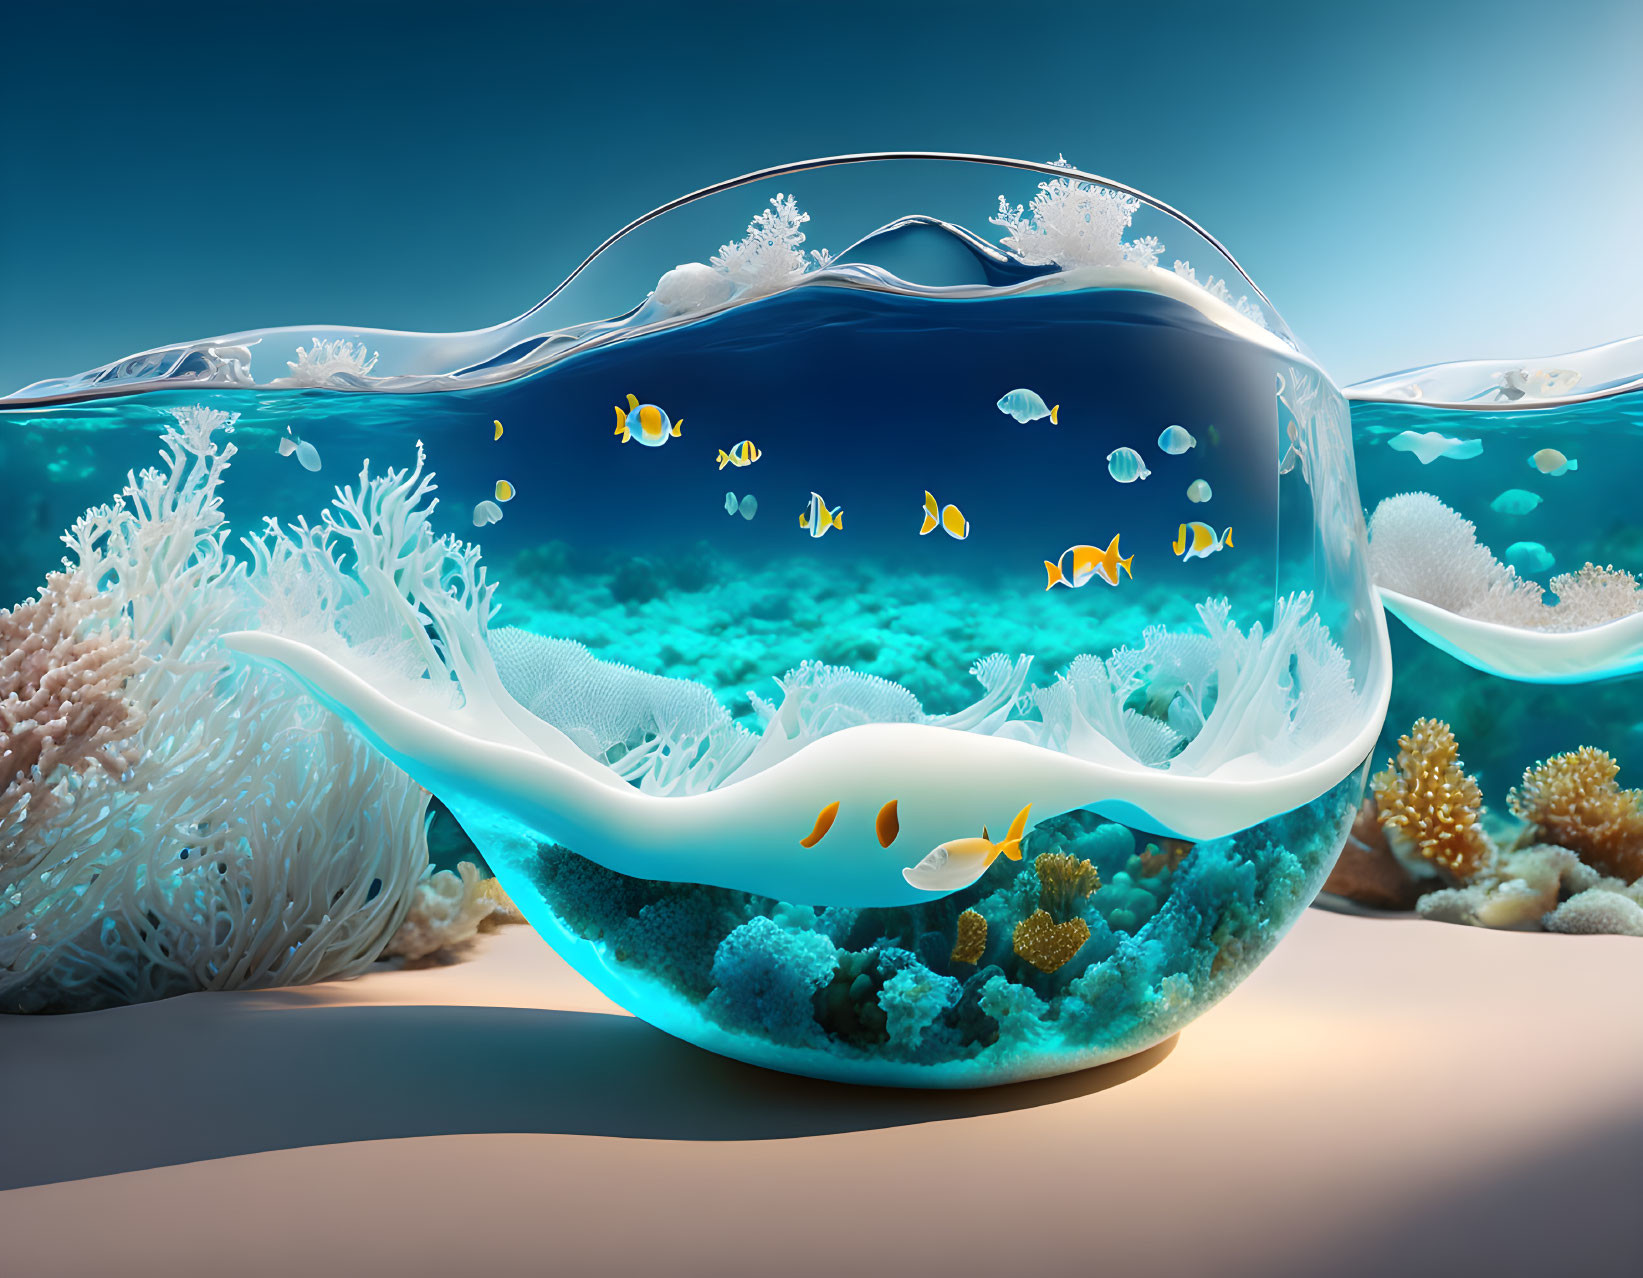 Digital artwork: Fishbowl merging with underwater seascape, featuring coral, fish, and anem